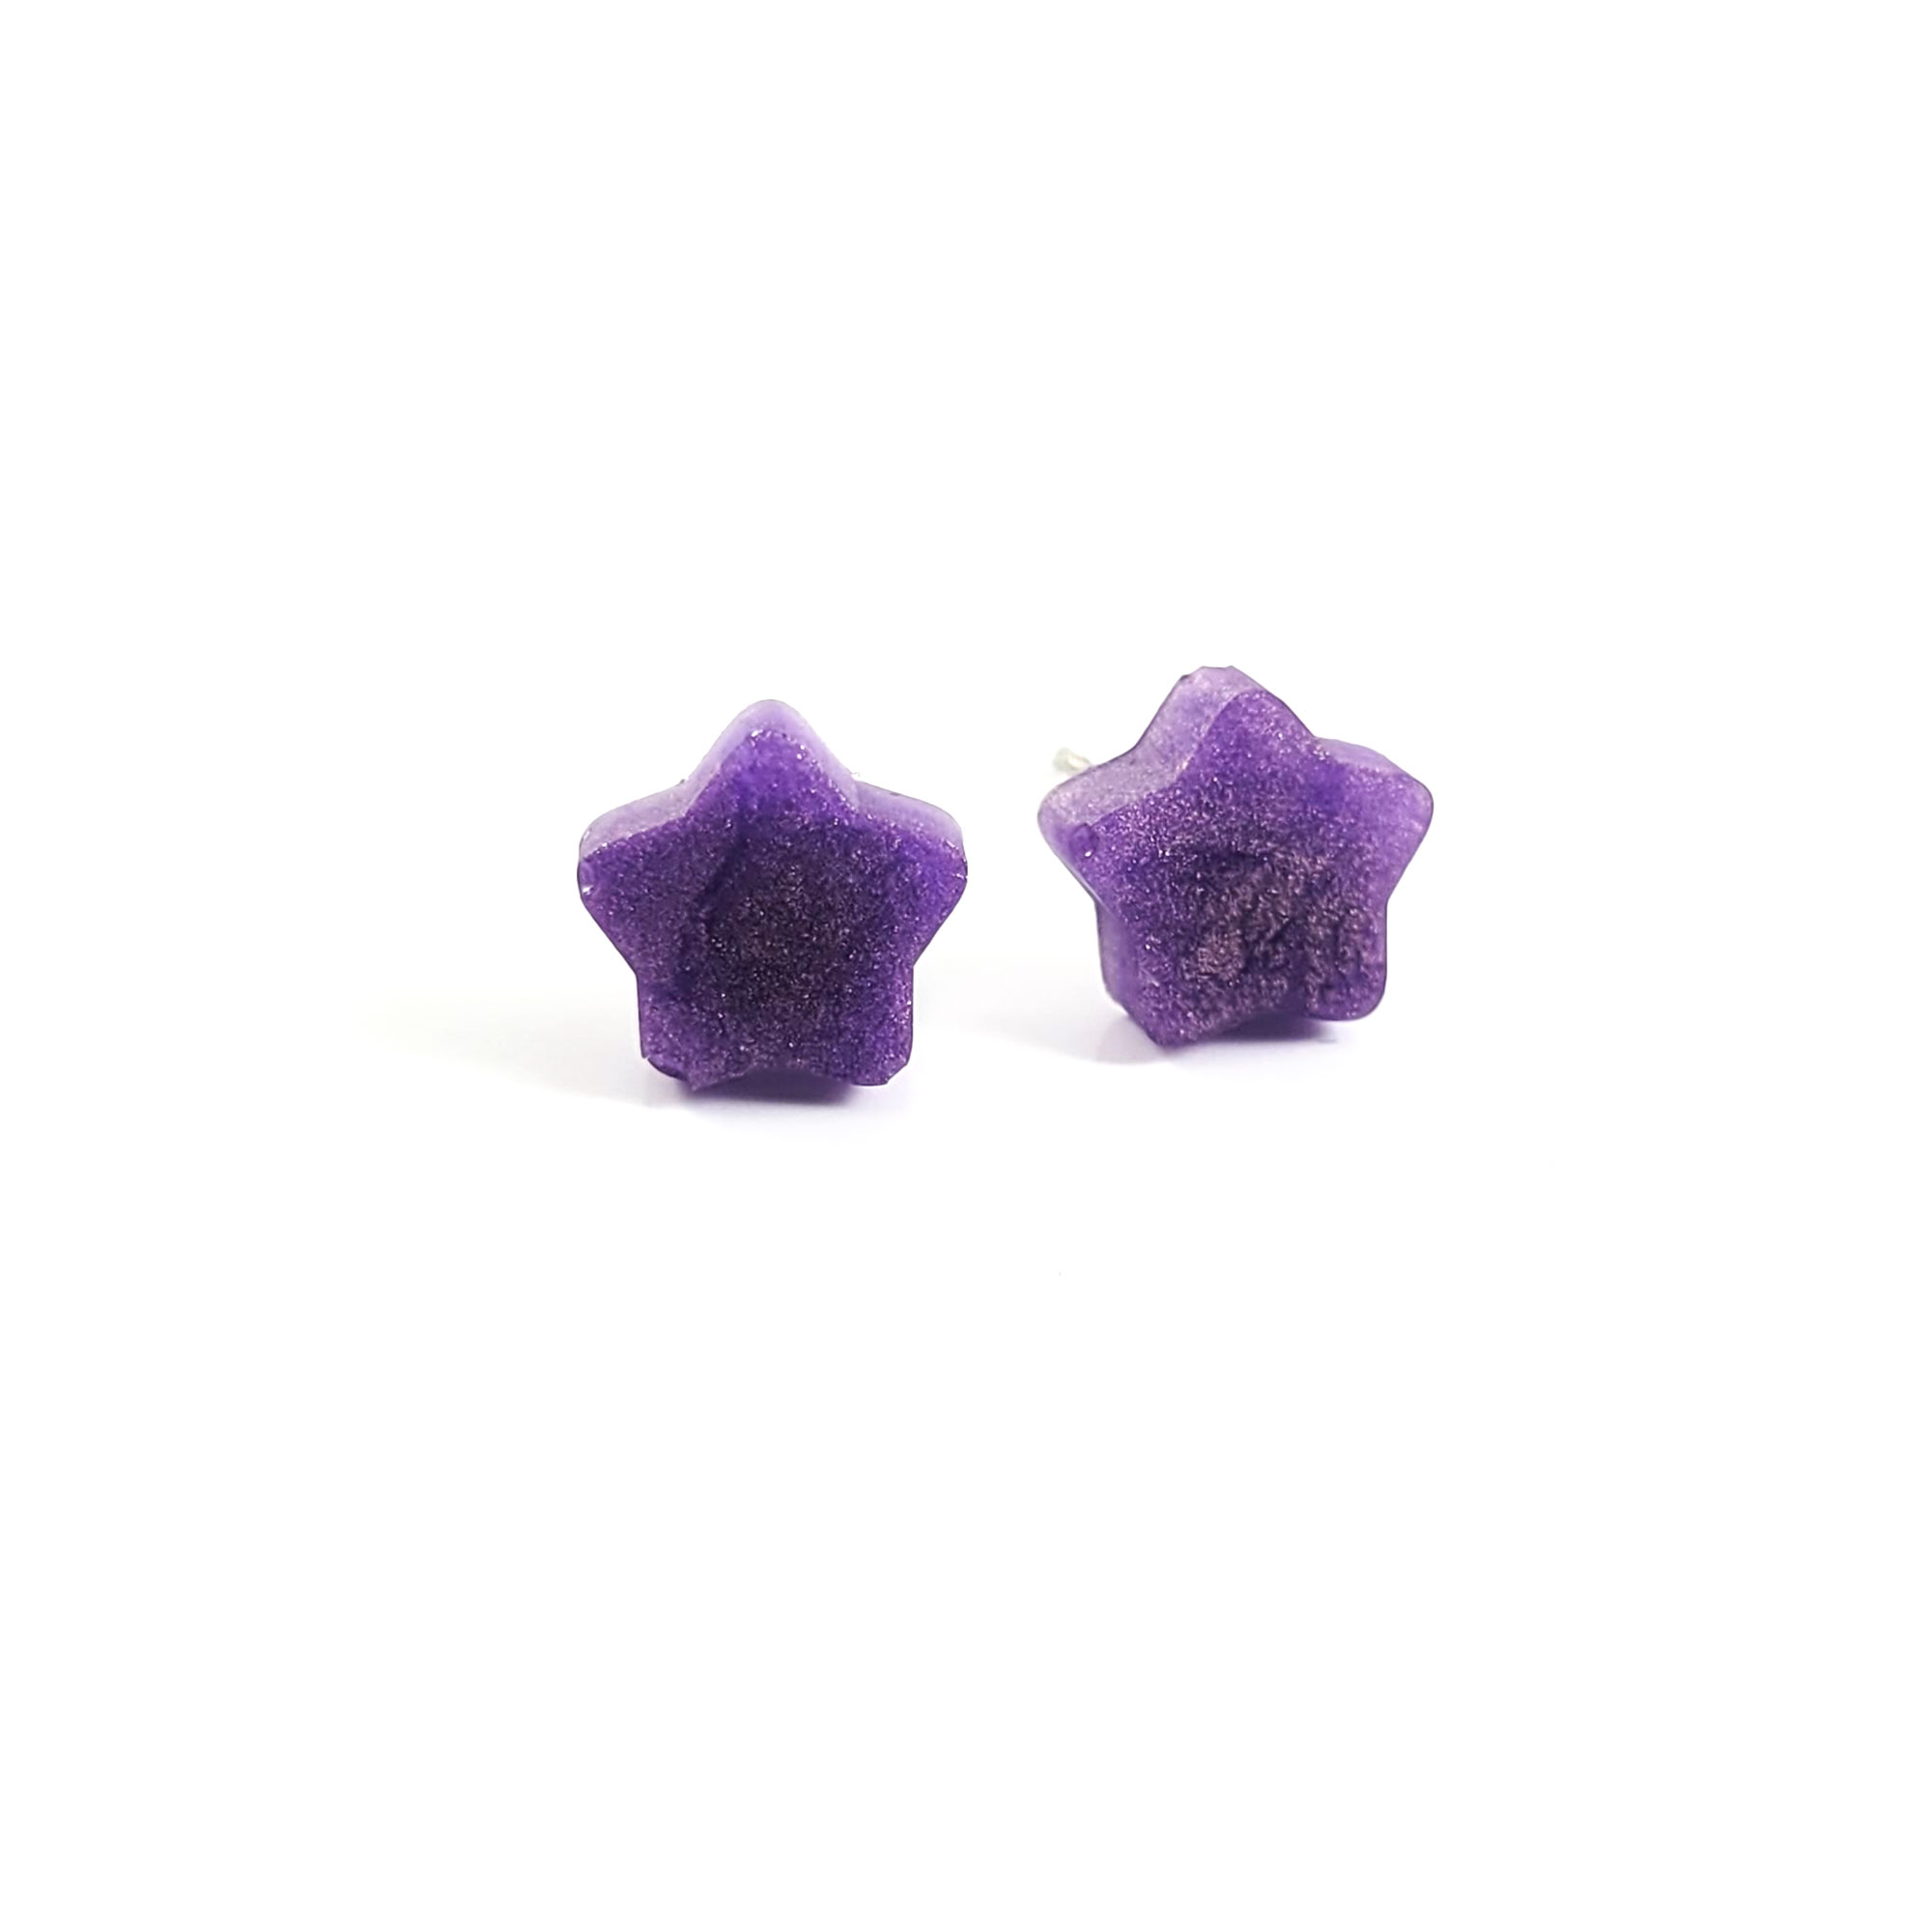 Tiny Star Stud Earrings in Color Shifting Purple by Wilde Designs